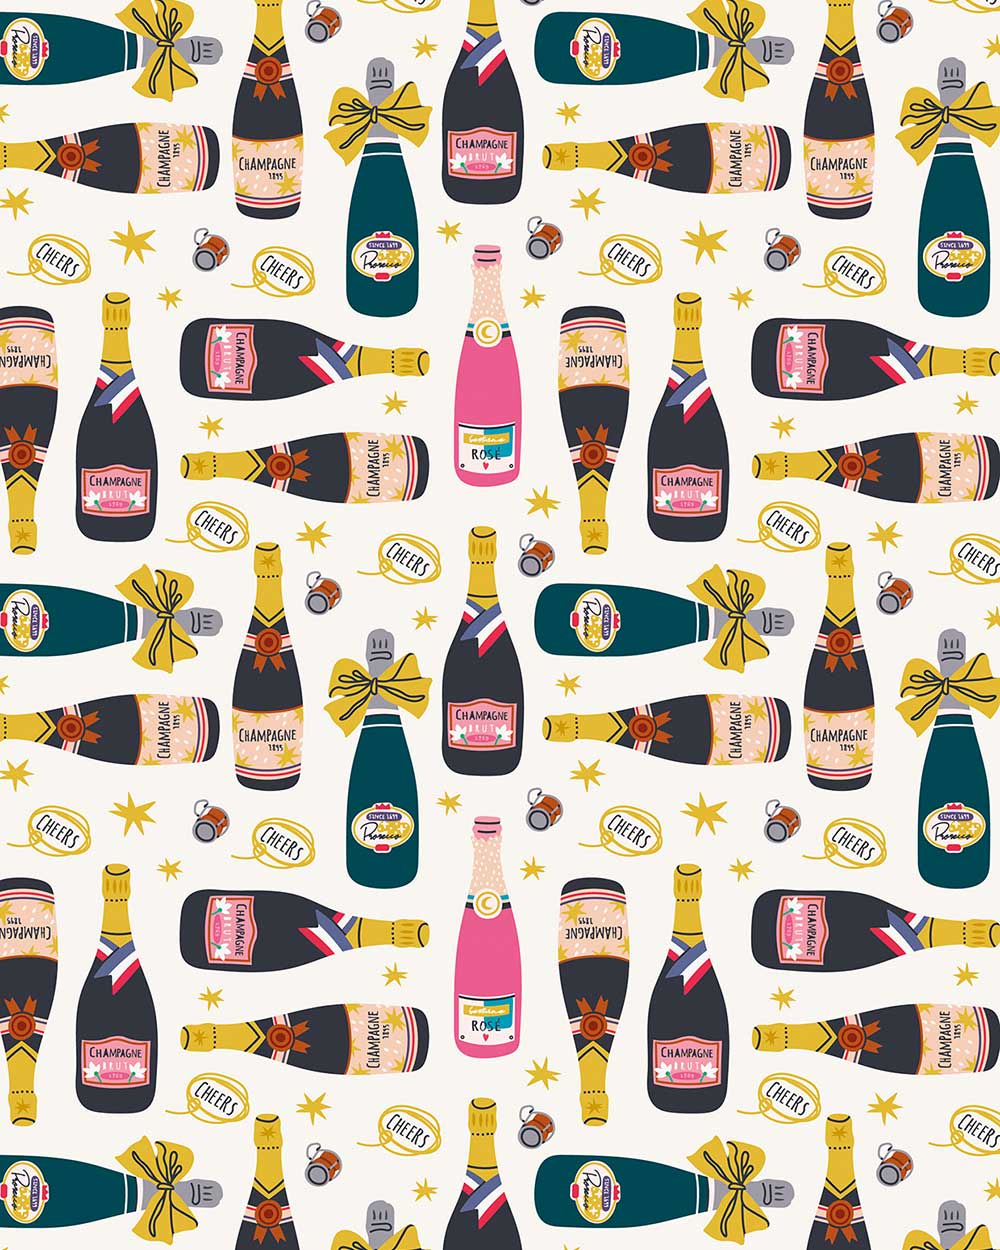 Gift Wrapping Paper Set Bubbly Celebrate